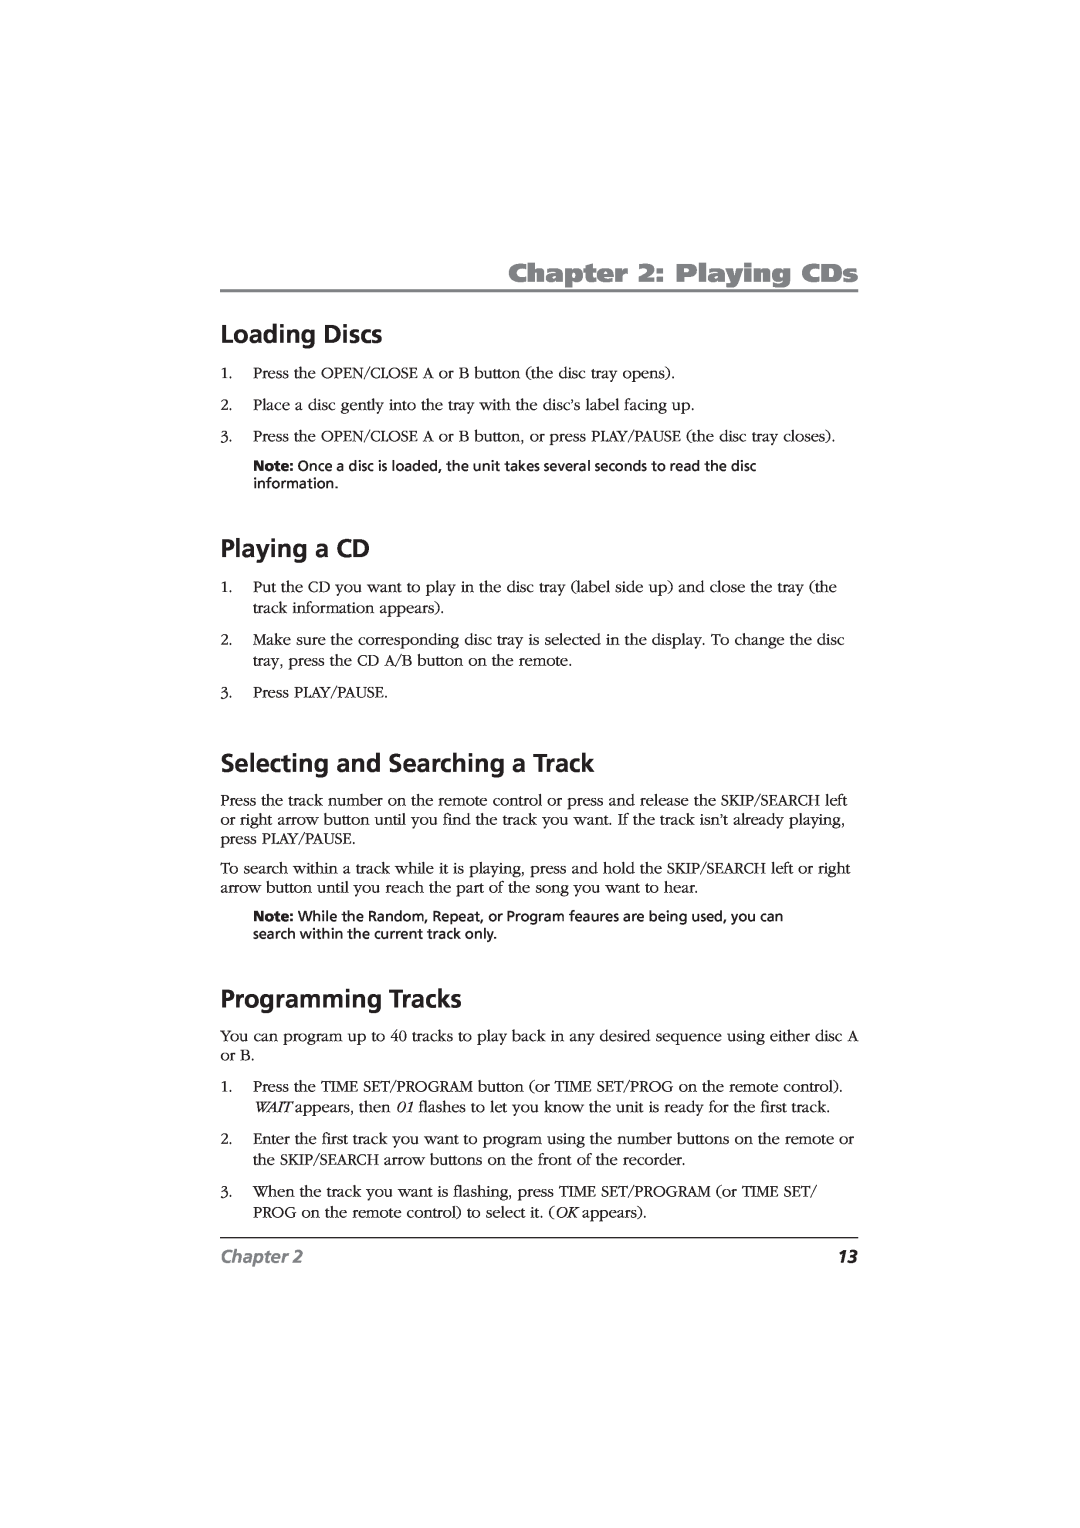 RCA CDRW10 manual Playing CDs, Loading Discs, Playing a CD, Selecting and Searching a Track, Programming Tracks, Chapter 